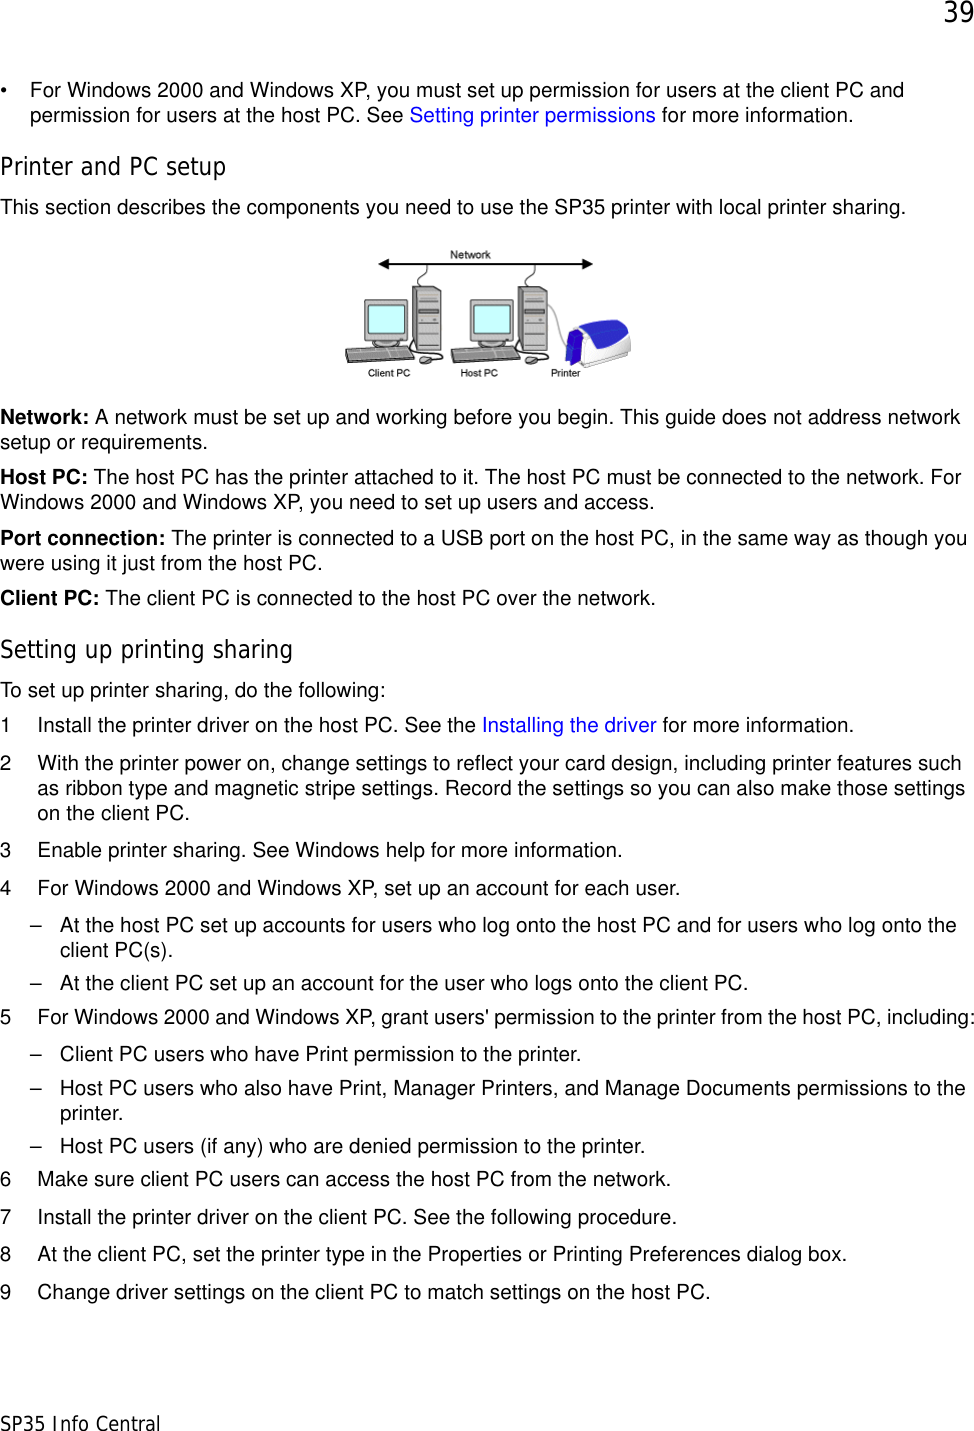 39SP35 Info Central• For Windows 2000 and Windows XP, you must set up permission for users at the client PC and permission for users at the host PC. See Setting printer permissions for more information.Printer and PC setupThis section describes the components you need to use the SP35 printer with local printer sharing.Network: A network must be set up and working before you begin. This guide does not address network setup or requirements.Host PC: The host PC has the printer attached to it. The host PC must be connected to the network. For Windows 2000 and Windows XP, you need to set up users and access.Port connection: The printer is connected to a USB port on the host PC, in the same way as though you were using it just from the host PC.Client PC: The client PC is connected to the host PC over the network. Setting up printing sharingTo set up printer sharing, do the following:1 Install the printer driver on the host PC. See the Installing the driver for more information. 2 With the printer power on, change settings to reflect your card design, including printer features such as ribbon type and magnetic stripe settings. Record the settings so you can also make those settings on the client PC.3 Enable printer sharing. See Windows help for more information.4 For Windows 2000 and Windows XP, set up an account for each user.– At the host PC set up accounts for users who log onto the host PC and for users who log onto the client PC(s).– At the client PC set up an account for the user who logs onto the client PC.5 For Windows 2000 and Windows XP, grant users&apos; permission to the printer from the host PC, including:– Client PC users who have Print permission to the printer. – Host PC users who also have Print, Manager Printers, and Manage Documents permissions to the printer.– Host PC users (if any) who are denied permission to the printer.6 Make sure client PC users can access the host PC from the network.7 Install the printer driver on the client PC. See the following procedure.8 At the client PC, set the printer type in the Properties or Printing Preferences dialog box.9 Change driver settings on the client PC to match settings on the host PC.